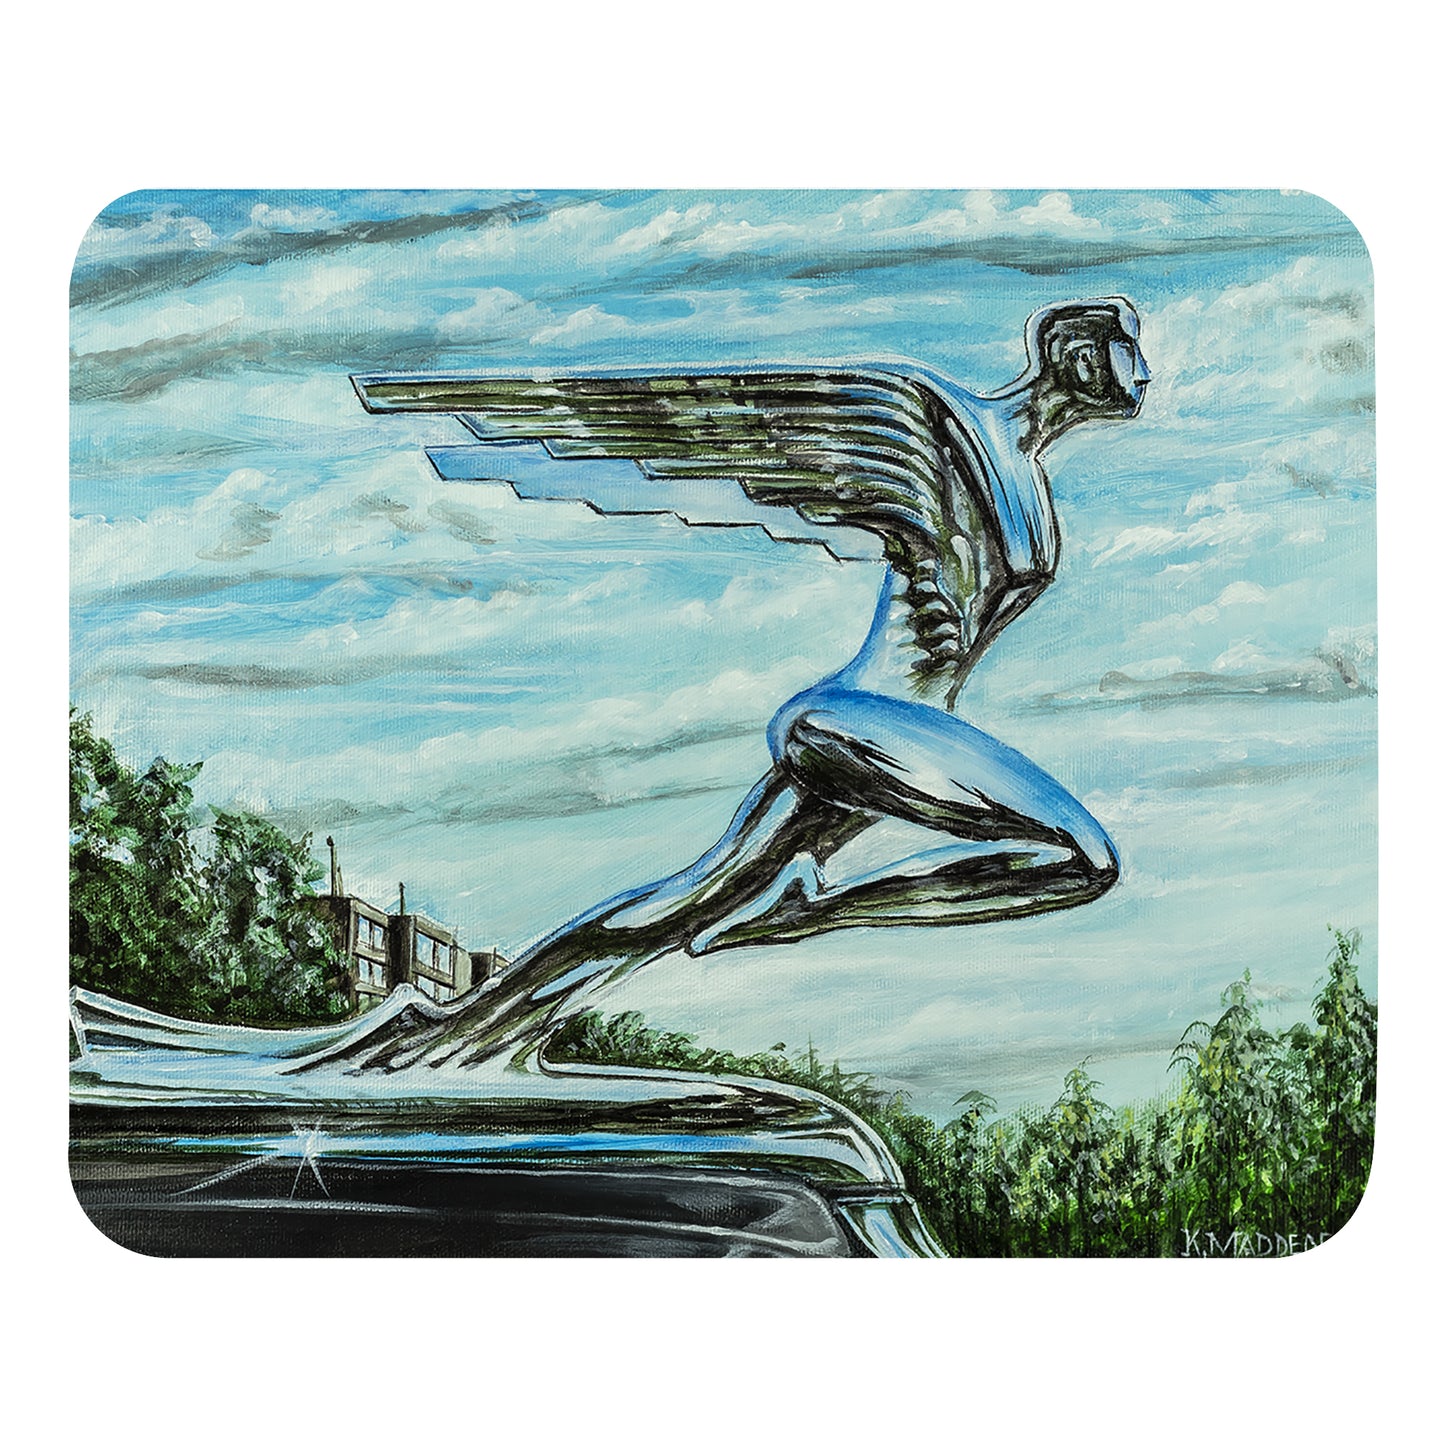 Flying High - MaddK Studio - Mouse pad MaddK mouse pad non-slip mouse pad